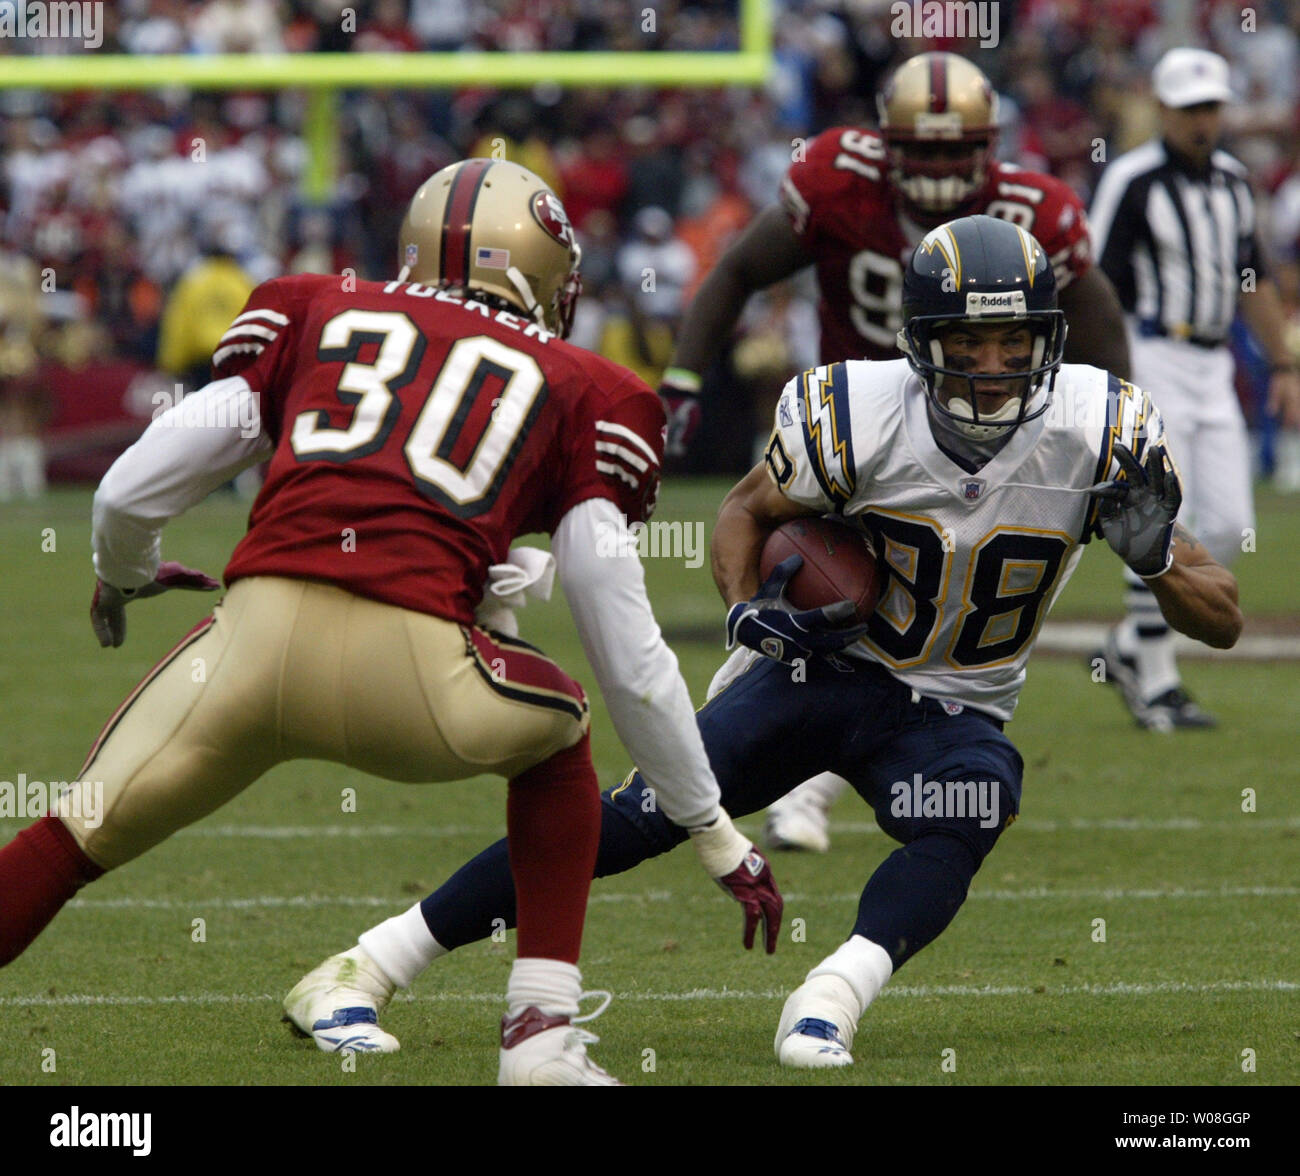 San Diego Chargers Eric Parker (88) tries to cut around San Francisco 49ers B.J. Tucker (30) for an 11yard gain in the second quarter at Monster Park in San Francisco on October  15, 2006.  The Chargers defeated the 49ers 48-19. (UPI Photo/Bruce Gordon) Stock Photo